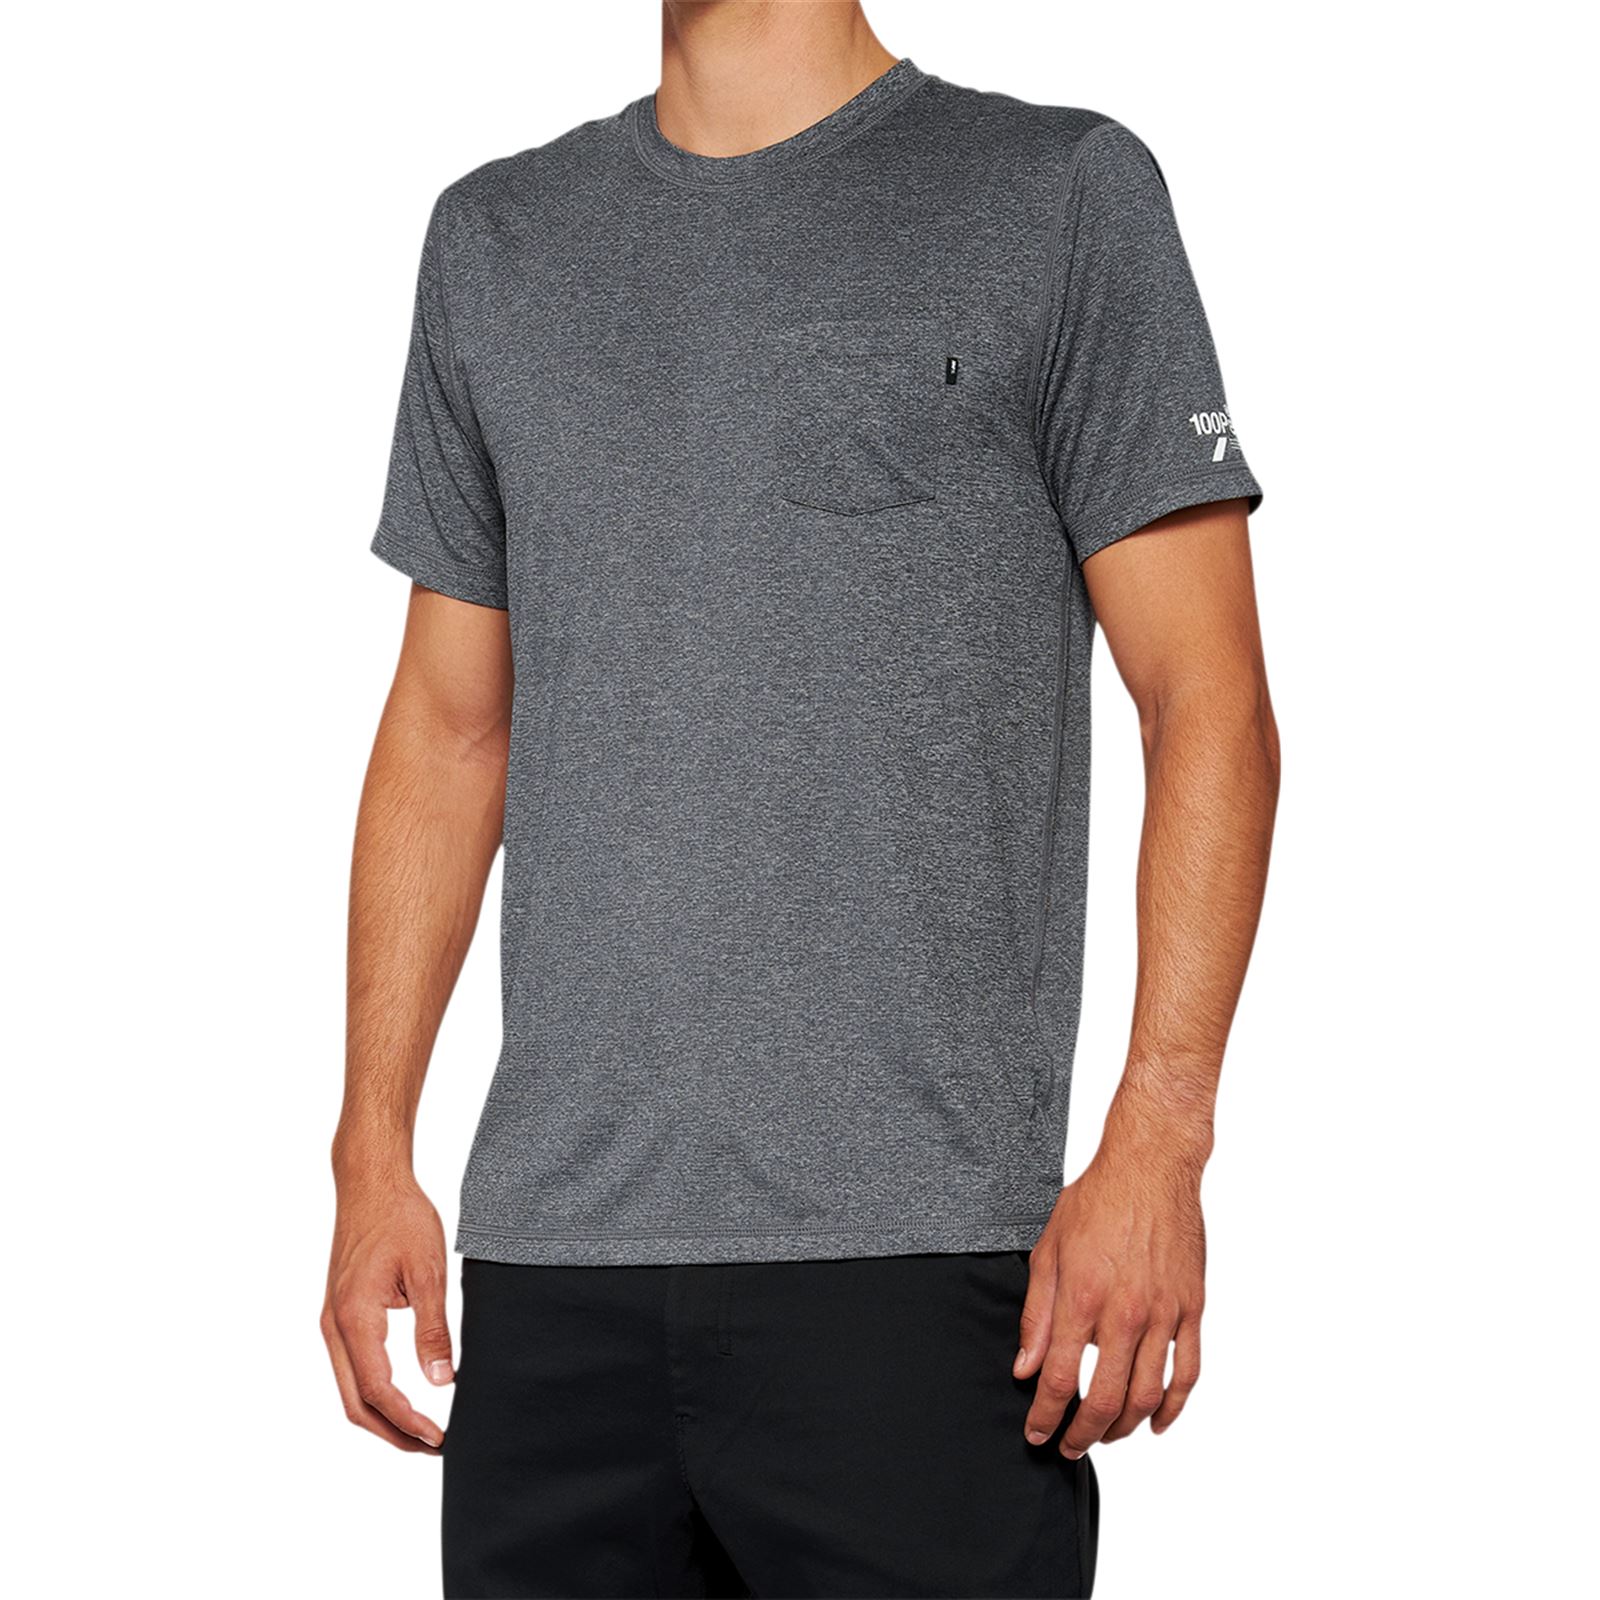 100% Mission Athletic T-Shirt - Charcoal - Large